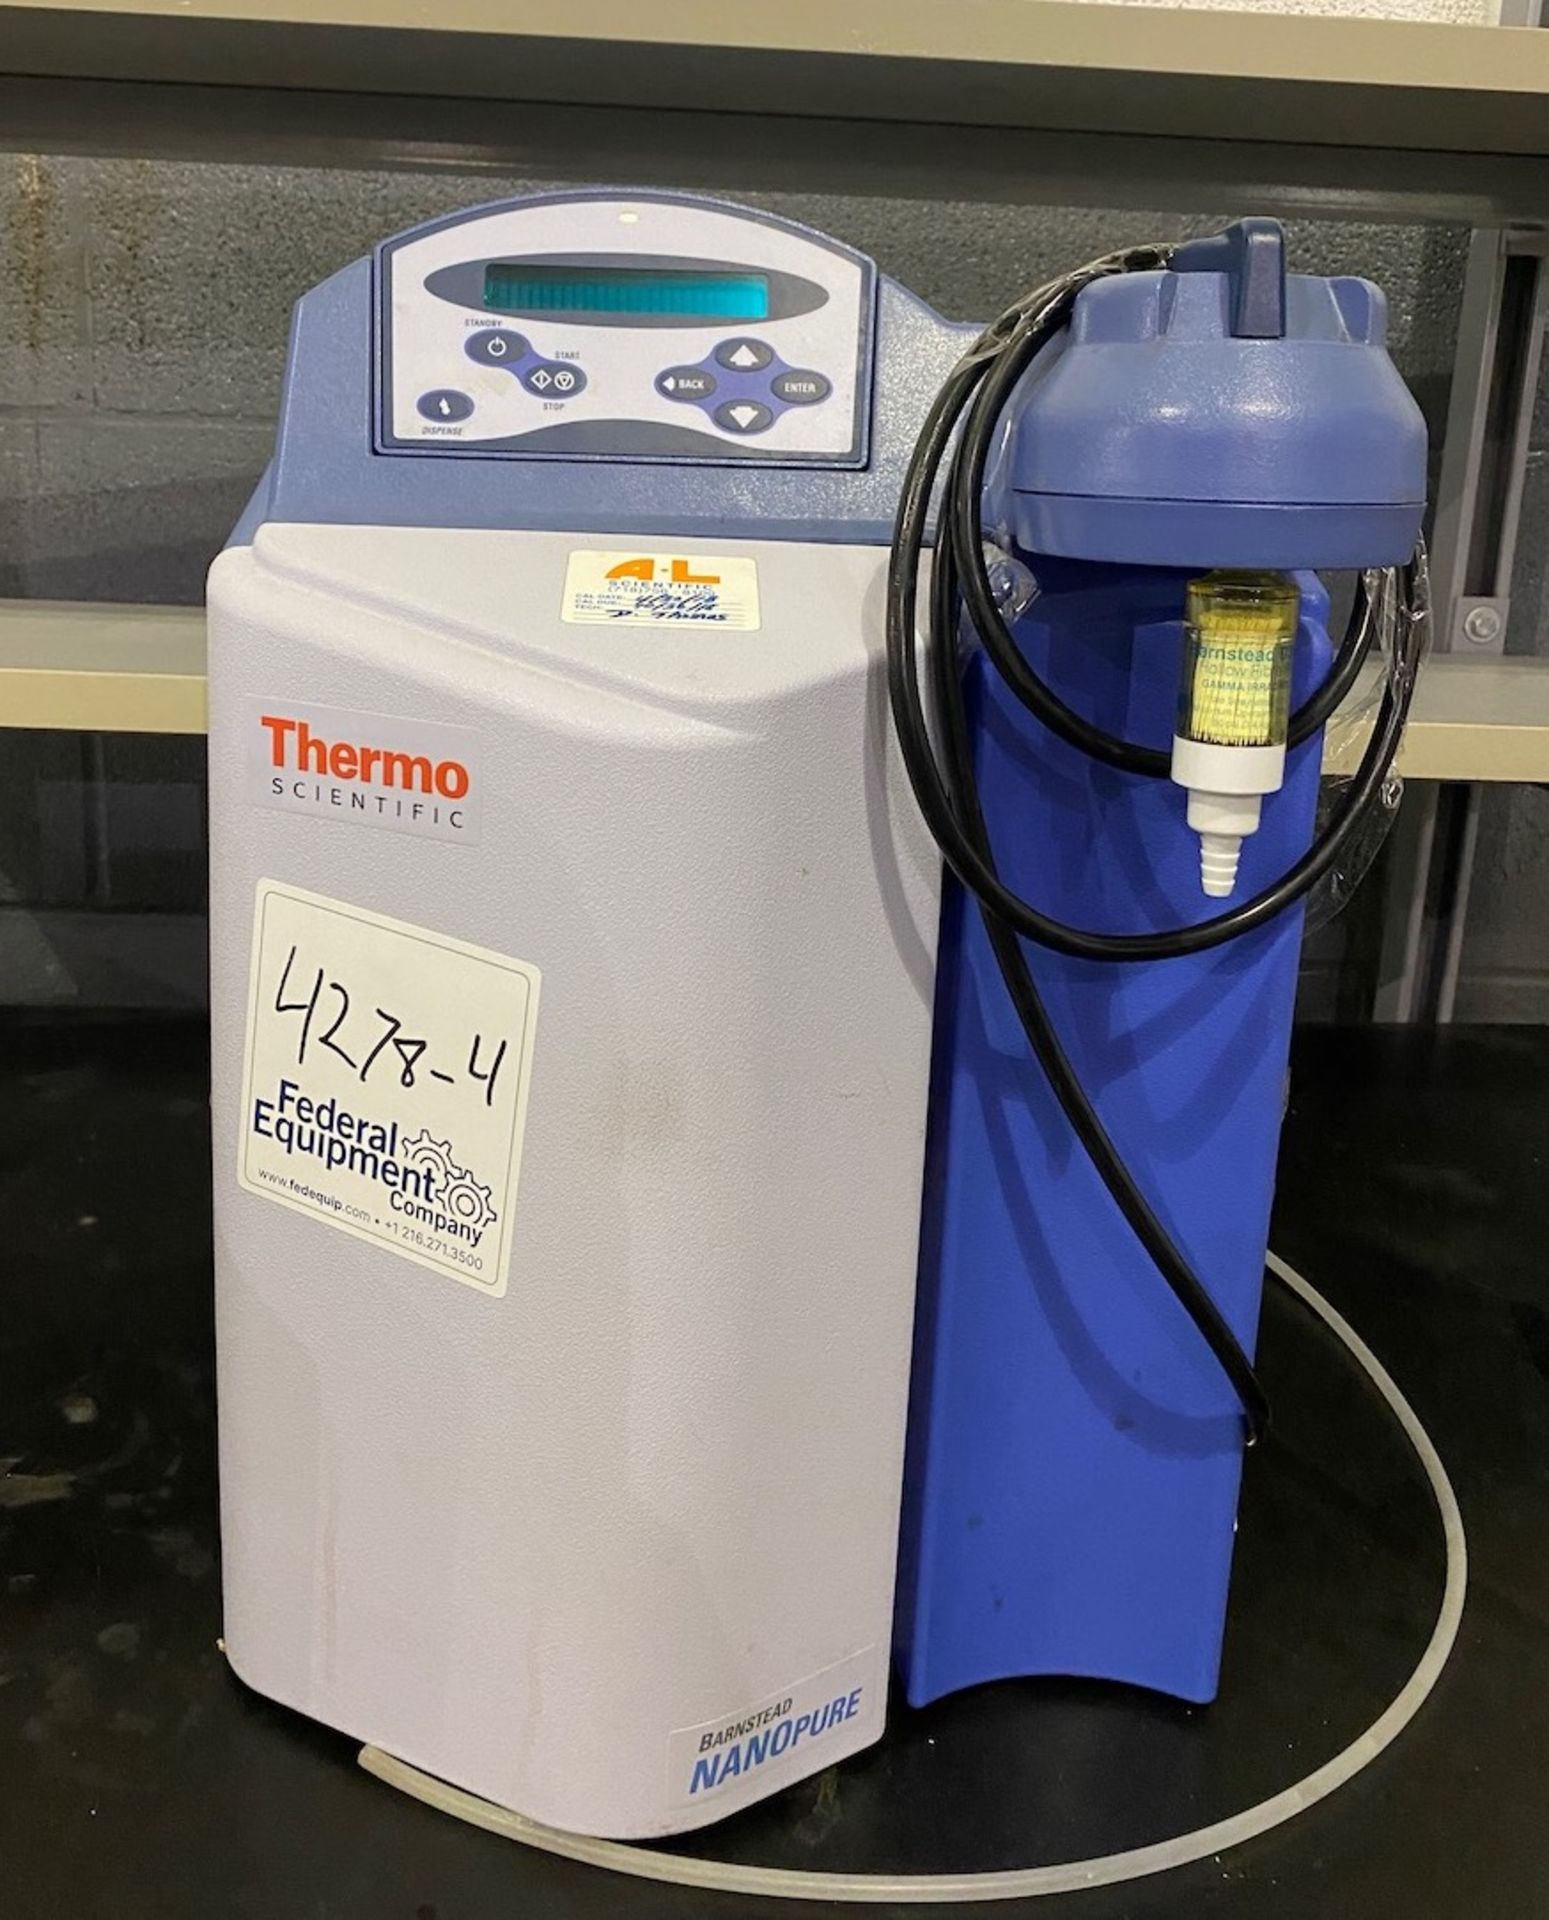 Barnstead Nanopure water system, made by Thermo Scientific, 2L per minute maximum throughput at